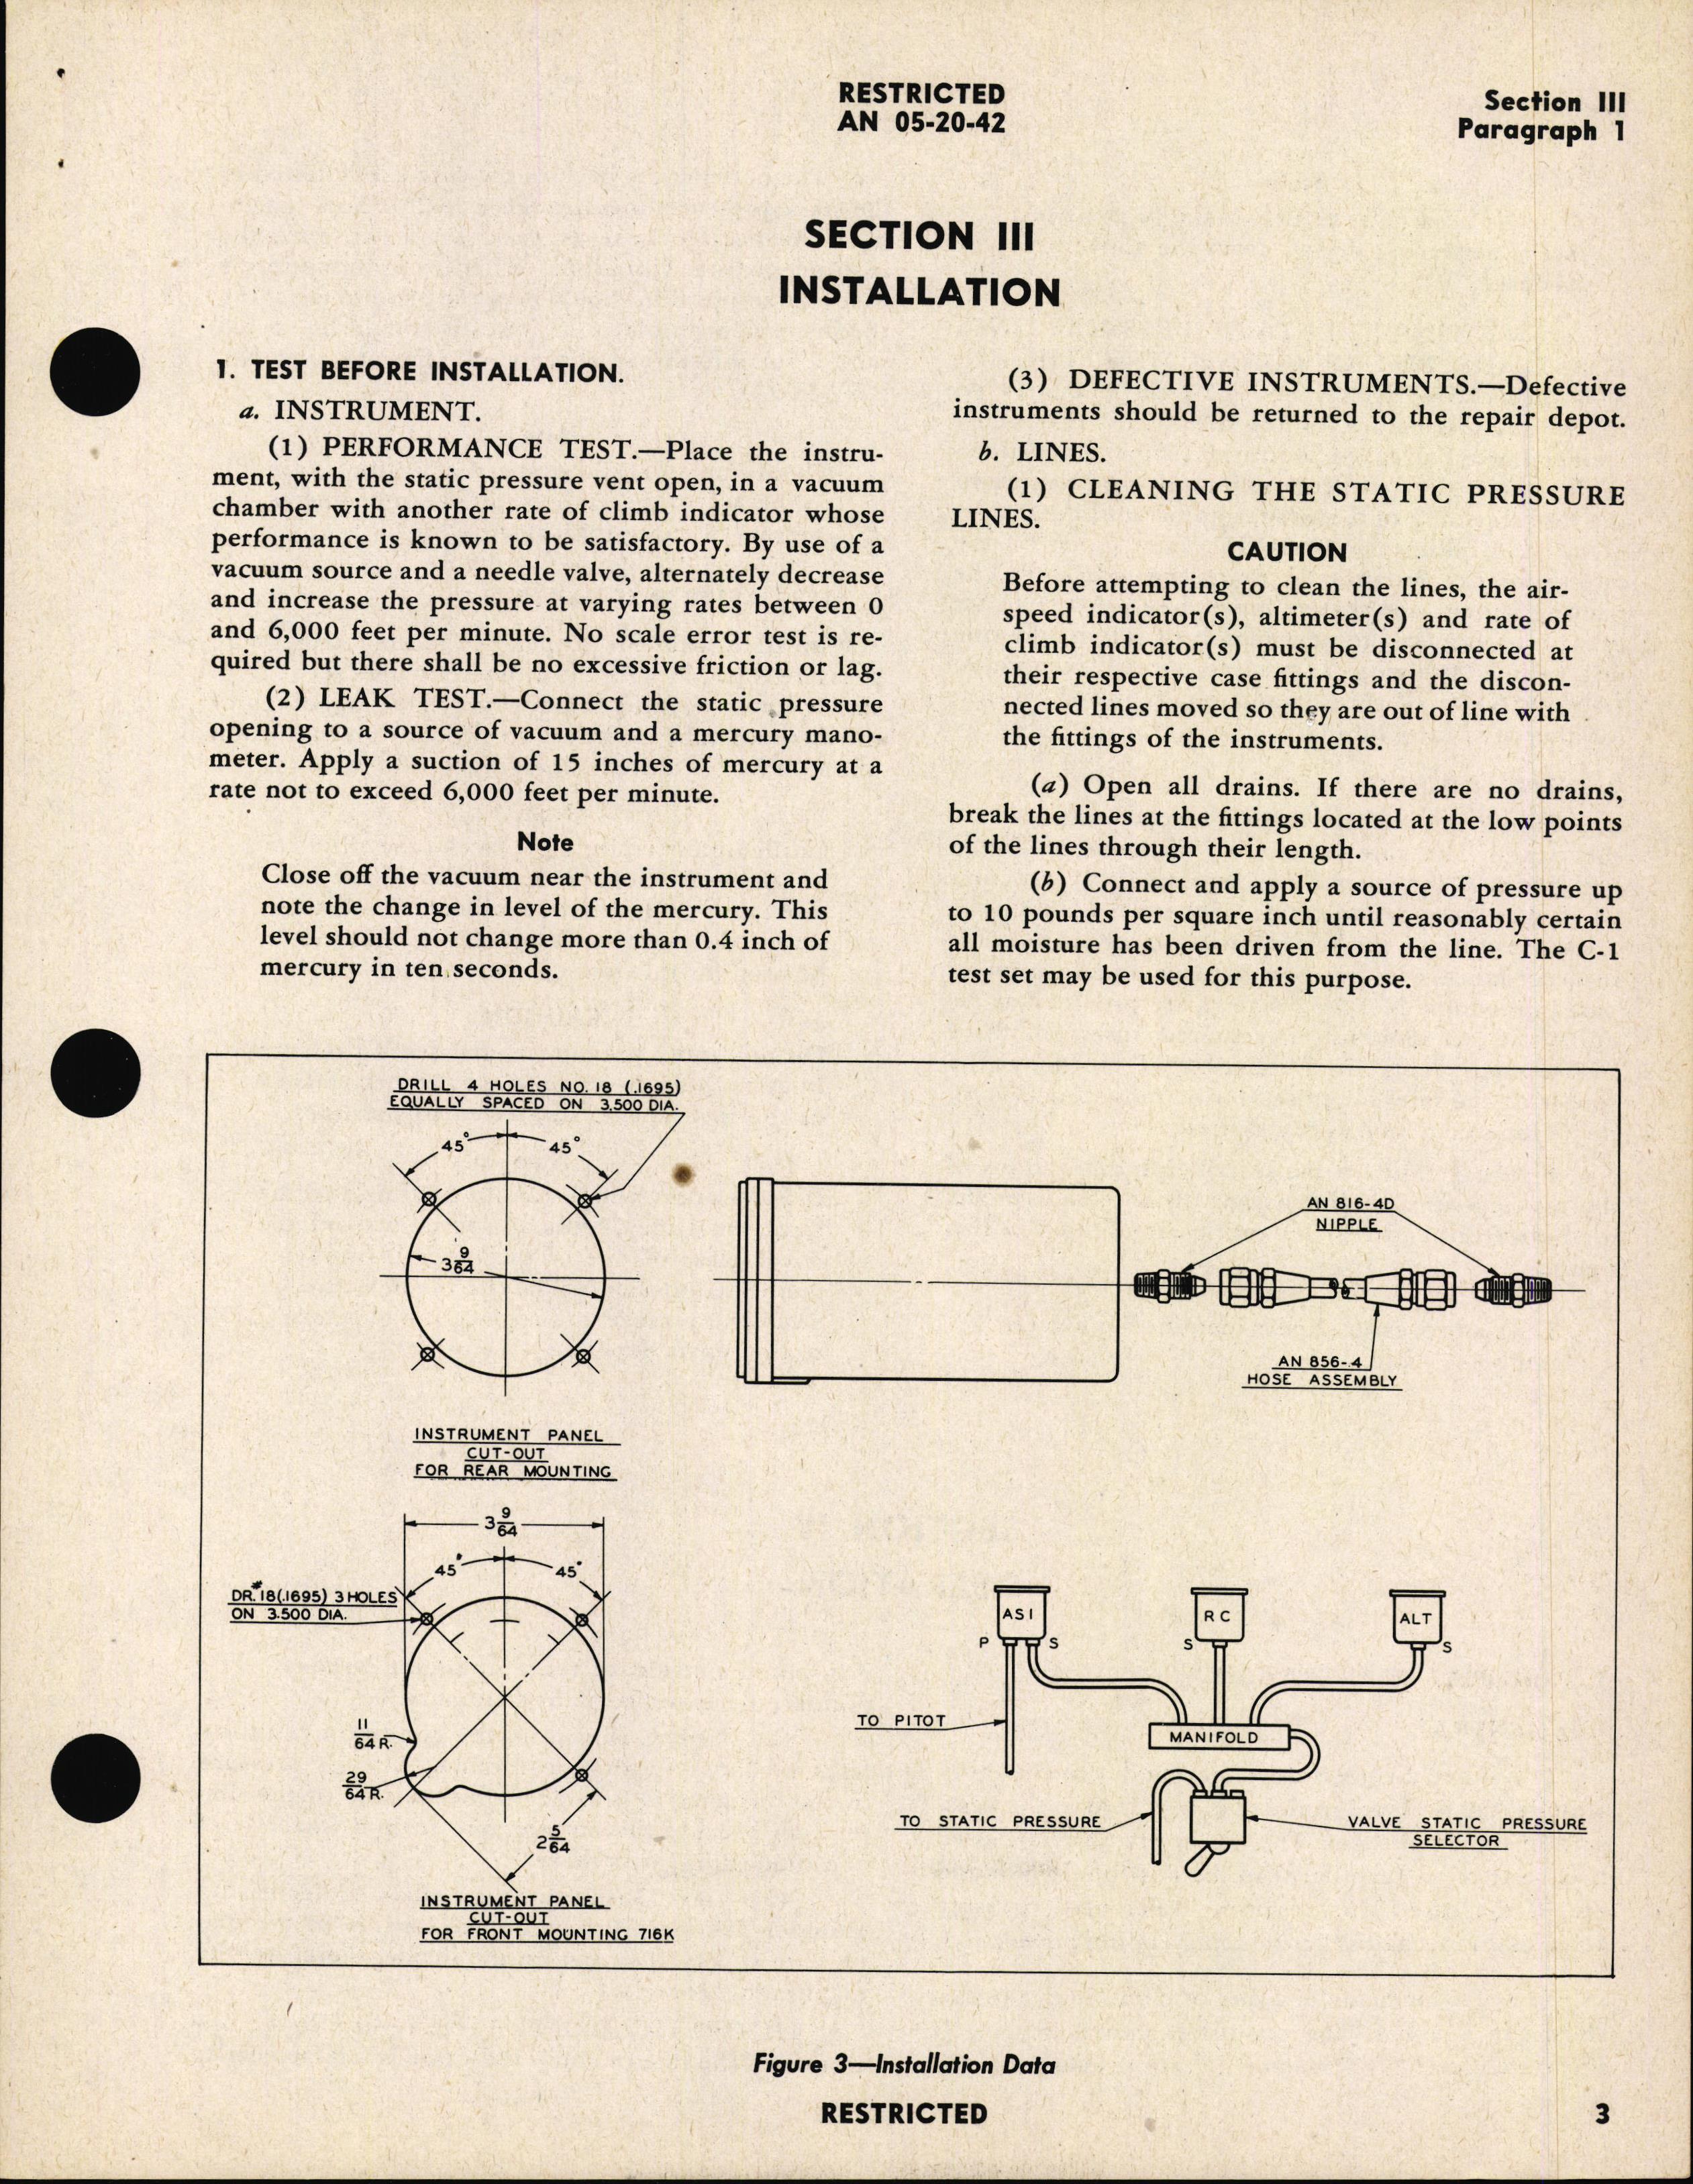 Sample page 7 from AirCorps Library document: Handbook of Instructions with Parts Catalog for Type C-3 Rate of Climb Indicator